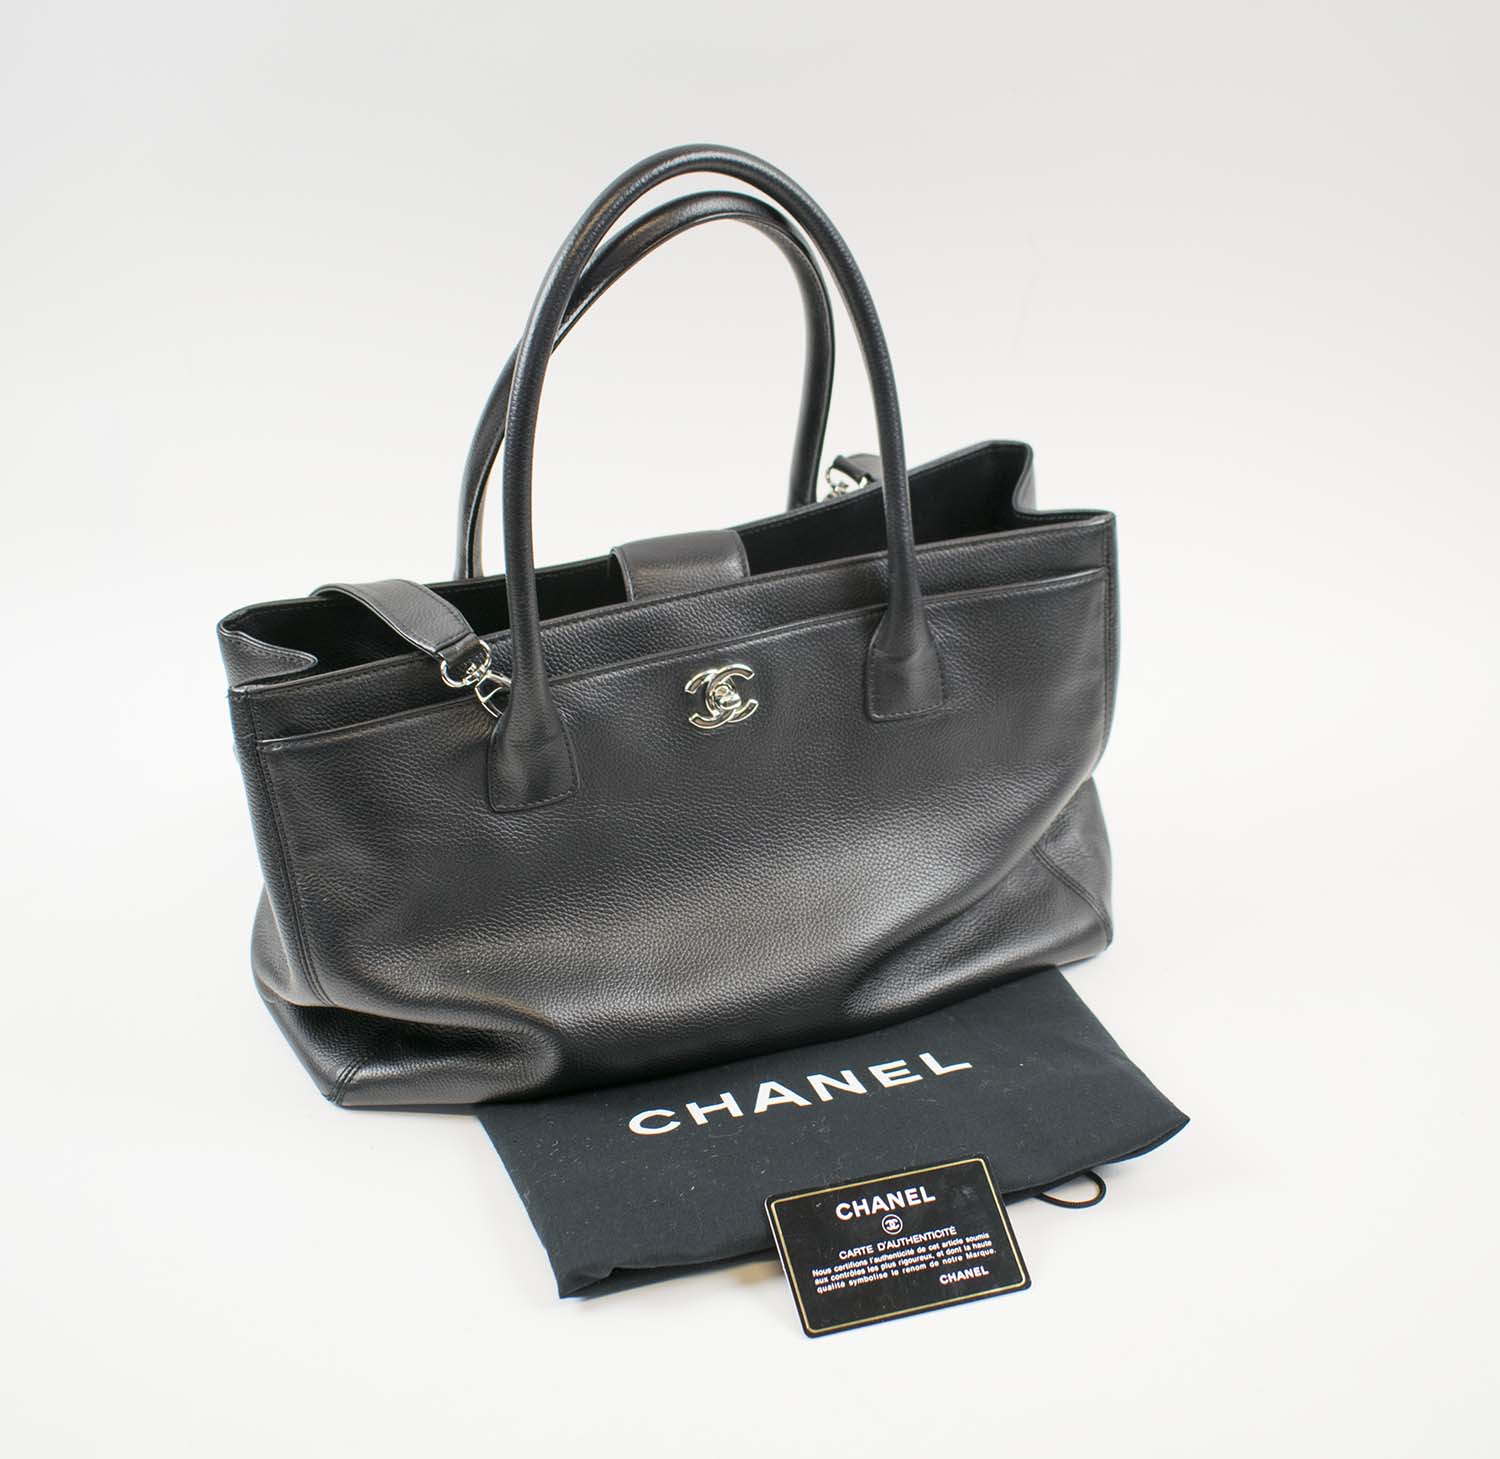 CHANEL EXECUTIVE TOTE BAG, black caviar leather with silver tone